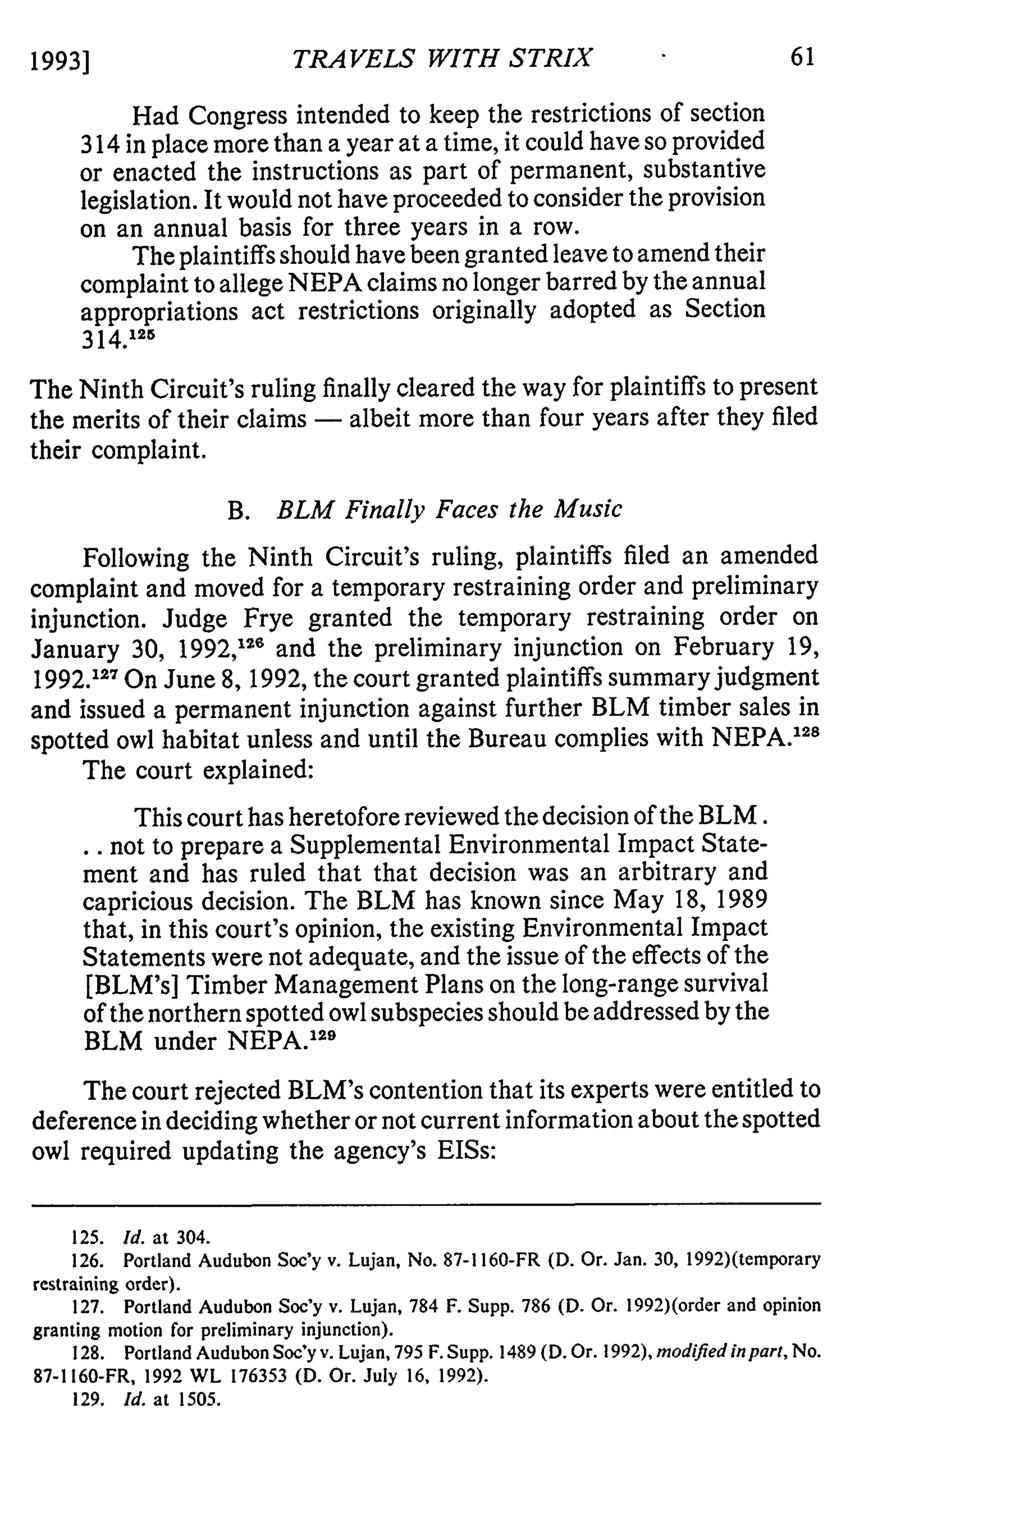 1993] TRAVELS WITH STRIX Had Congress intended to keep the restrictions of section 314 in place more than a year at a time, it could have so provided or enacted the instructions as part of permanent,